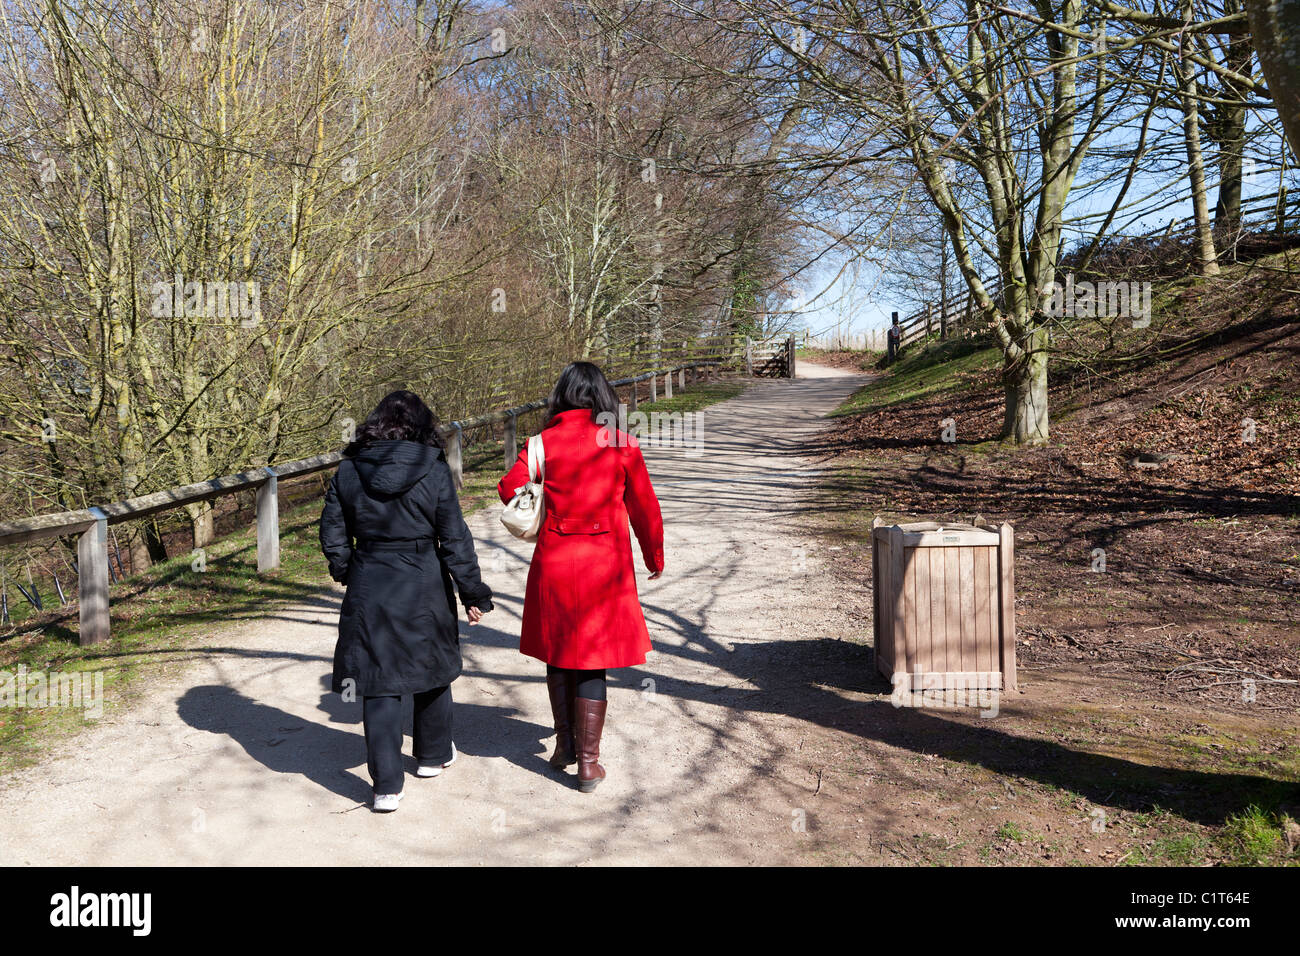 Two women in red and black clothes walking on path through woods Herefordshire England UK Stock Photo